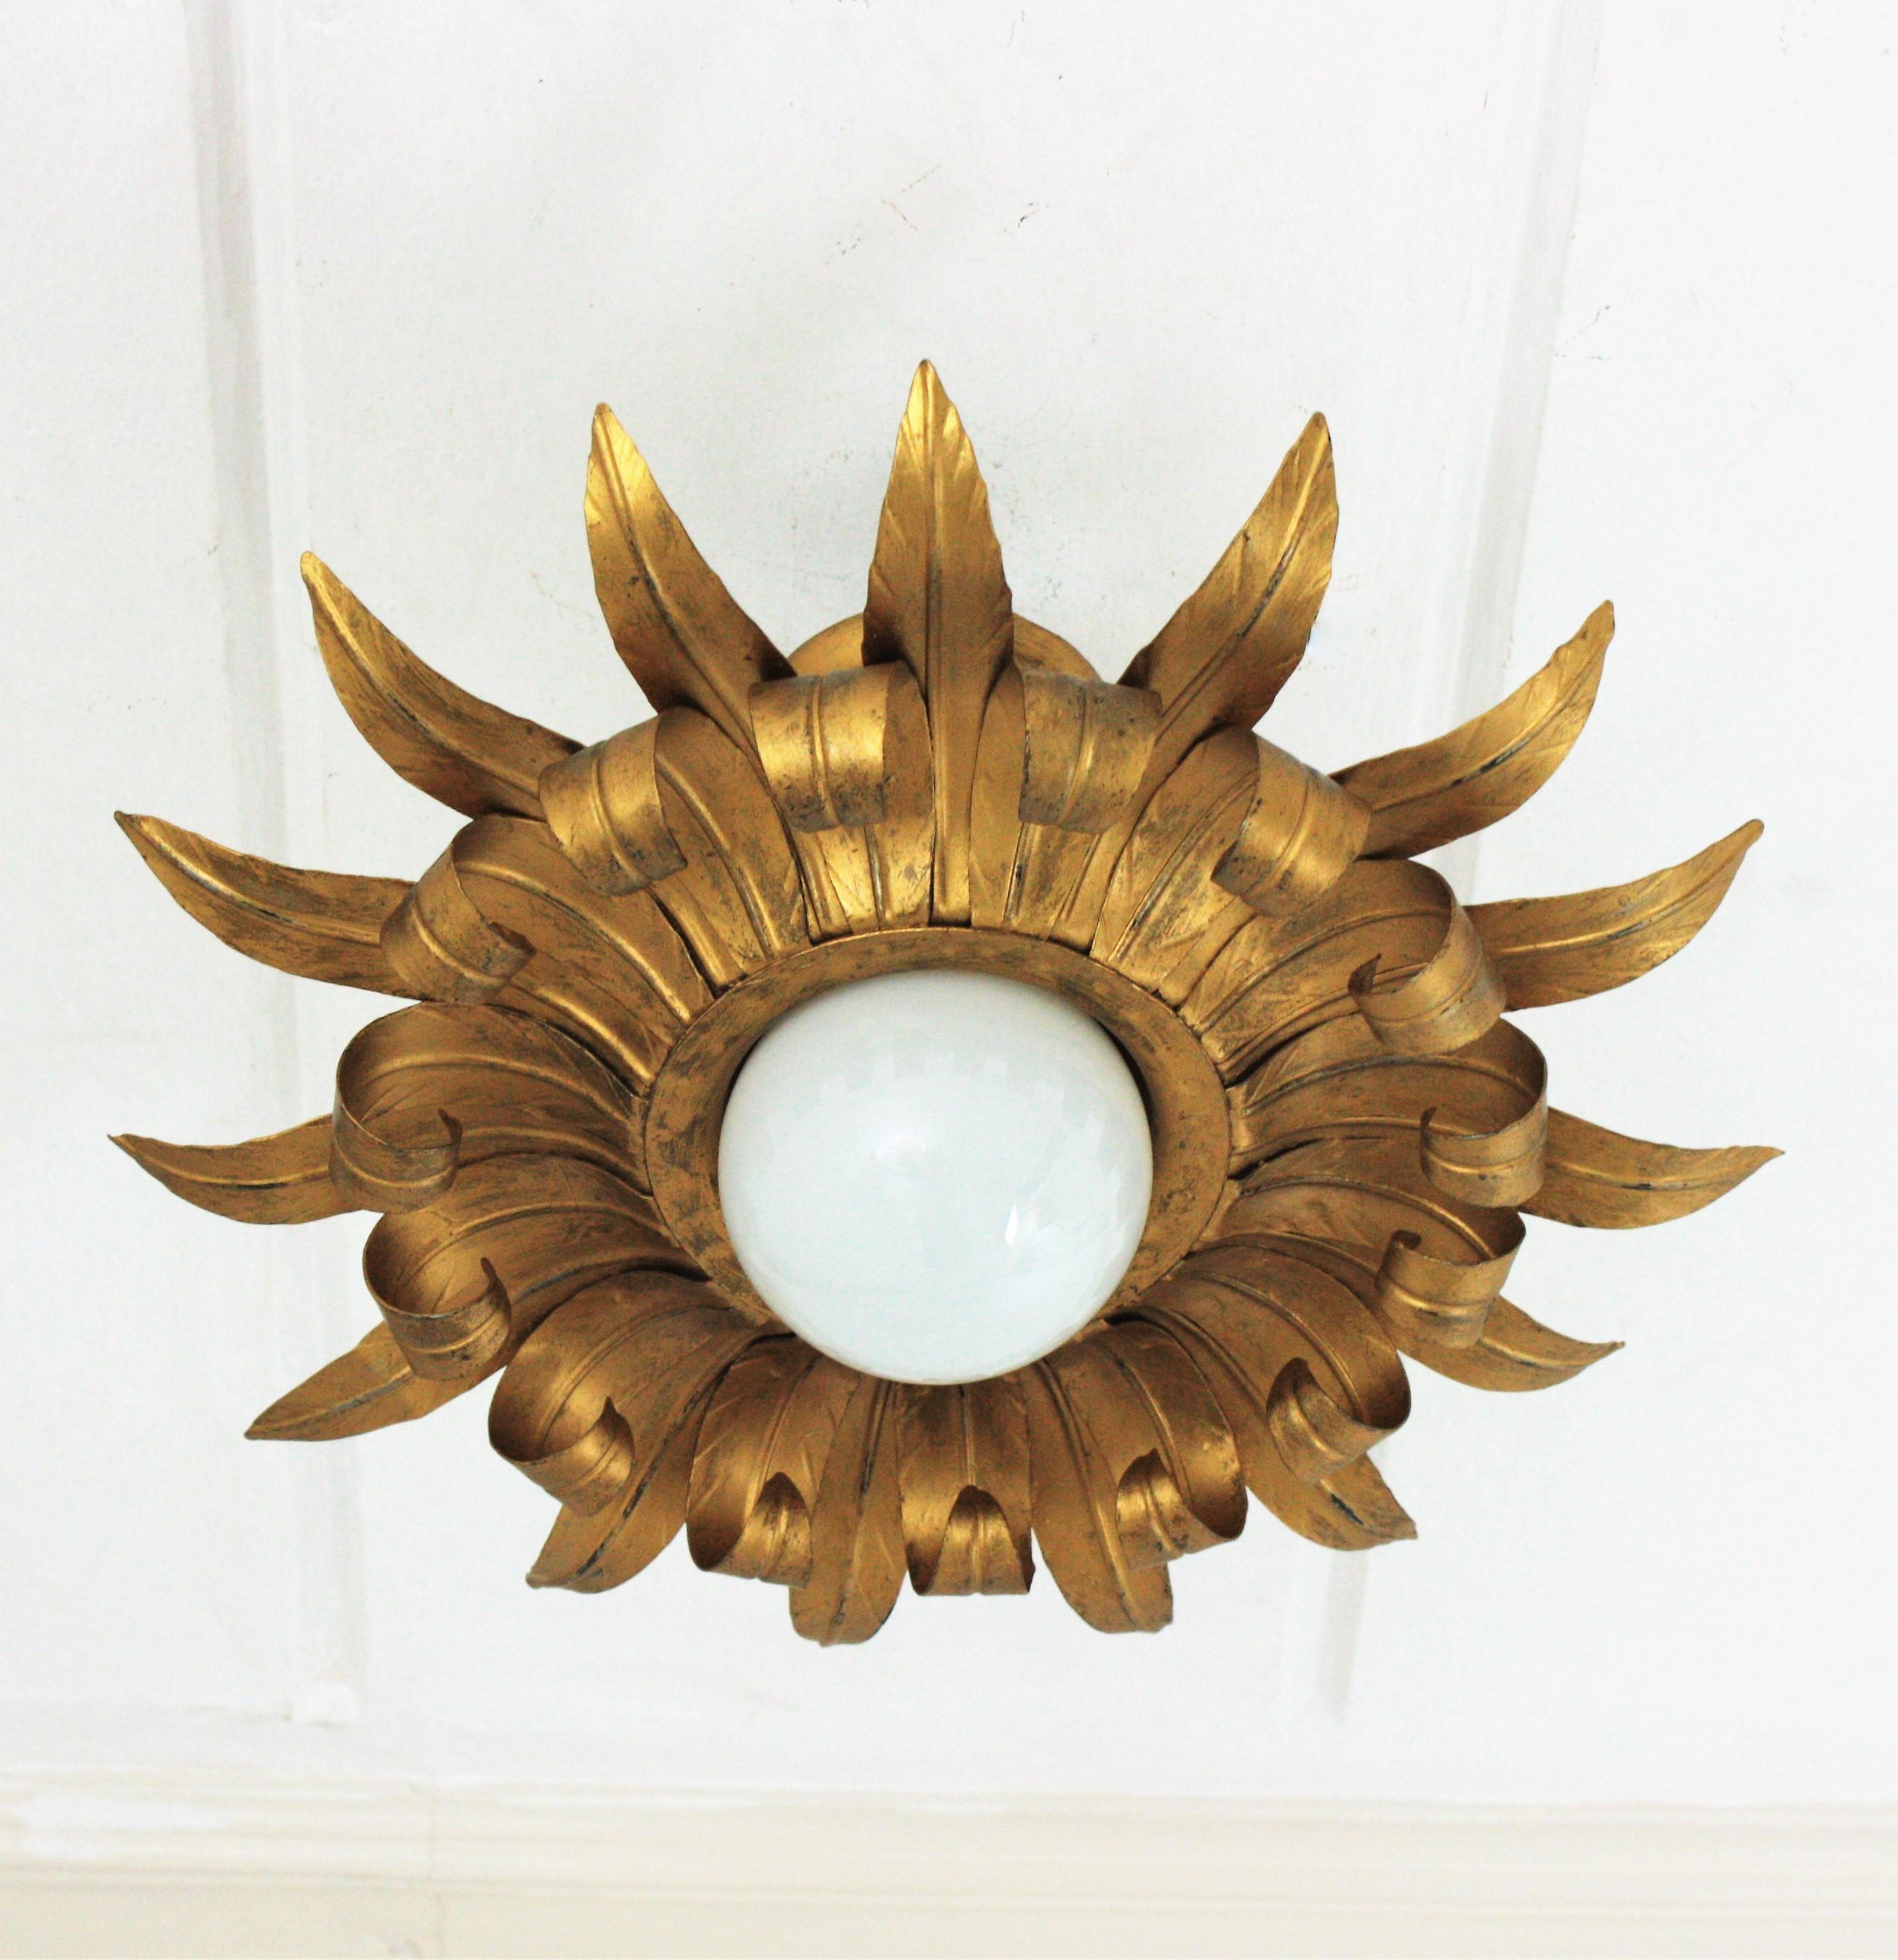 Brutalist gilt metal sunburst light fixture, France, 1950s.
Eye-catching iron sunburst flush mount with alternating rays in eye-lash shape.
It can be placed as ceiling light fixture or as a pendant hanging from a chain at the desired